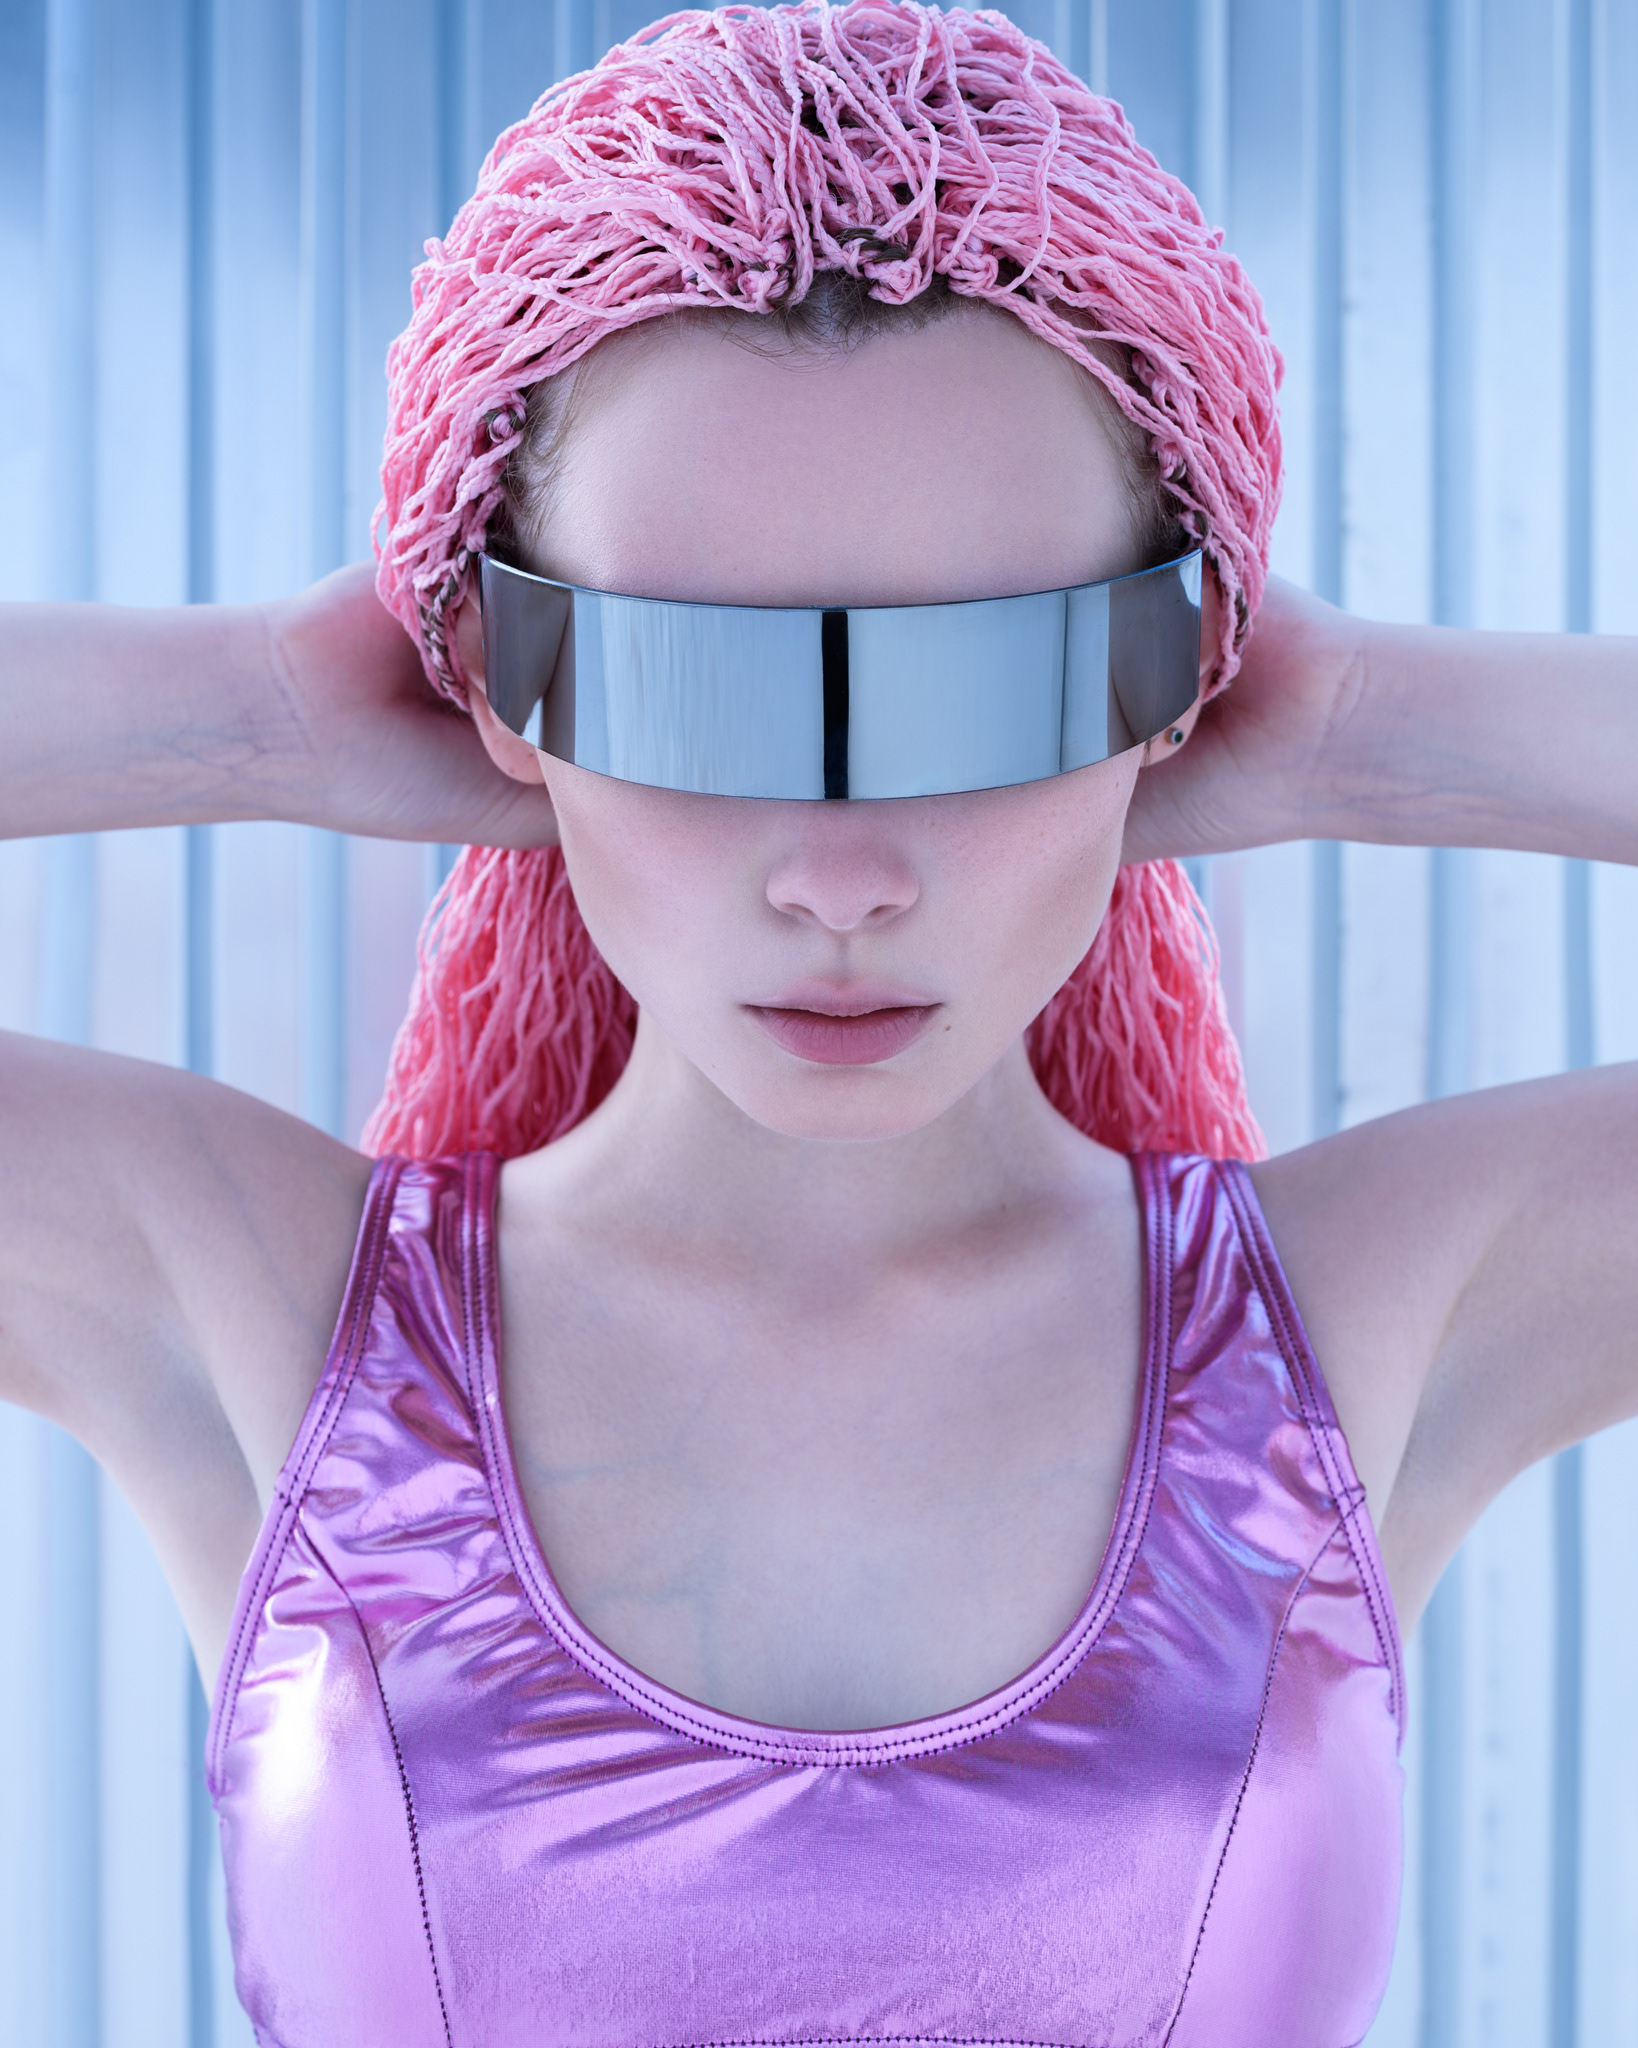 Women Women Indoors Visors Pink Hair Braids Pink Clothing Portrait Dyed Hair Women With Shades 1638x2048